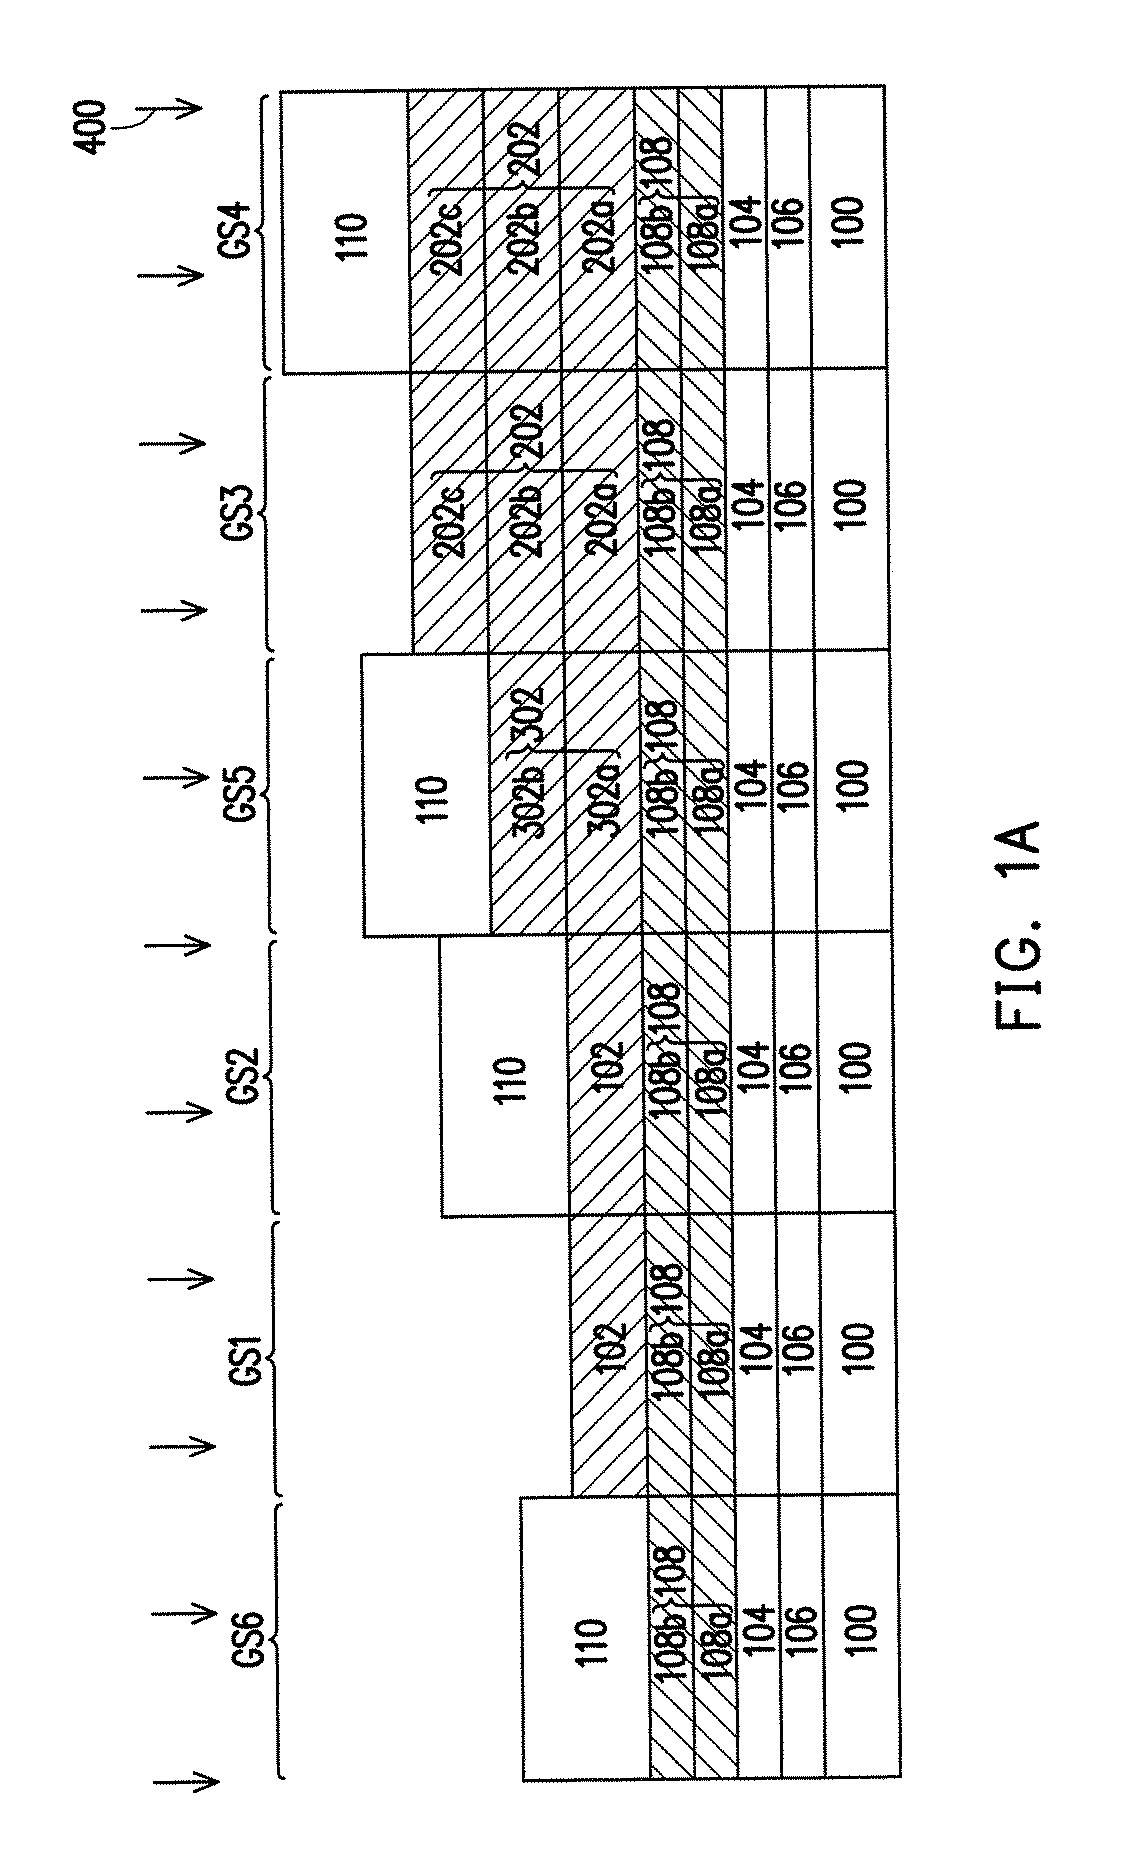 Method for modulating work function of semiconductor device having metal gate structure by gas treatment